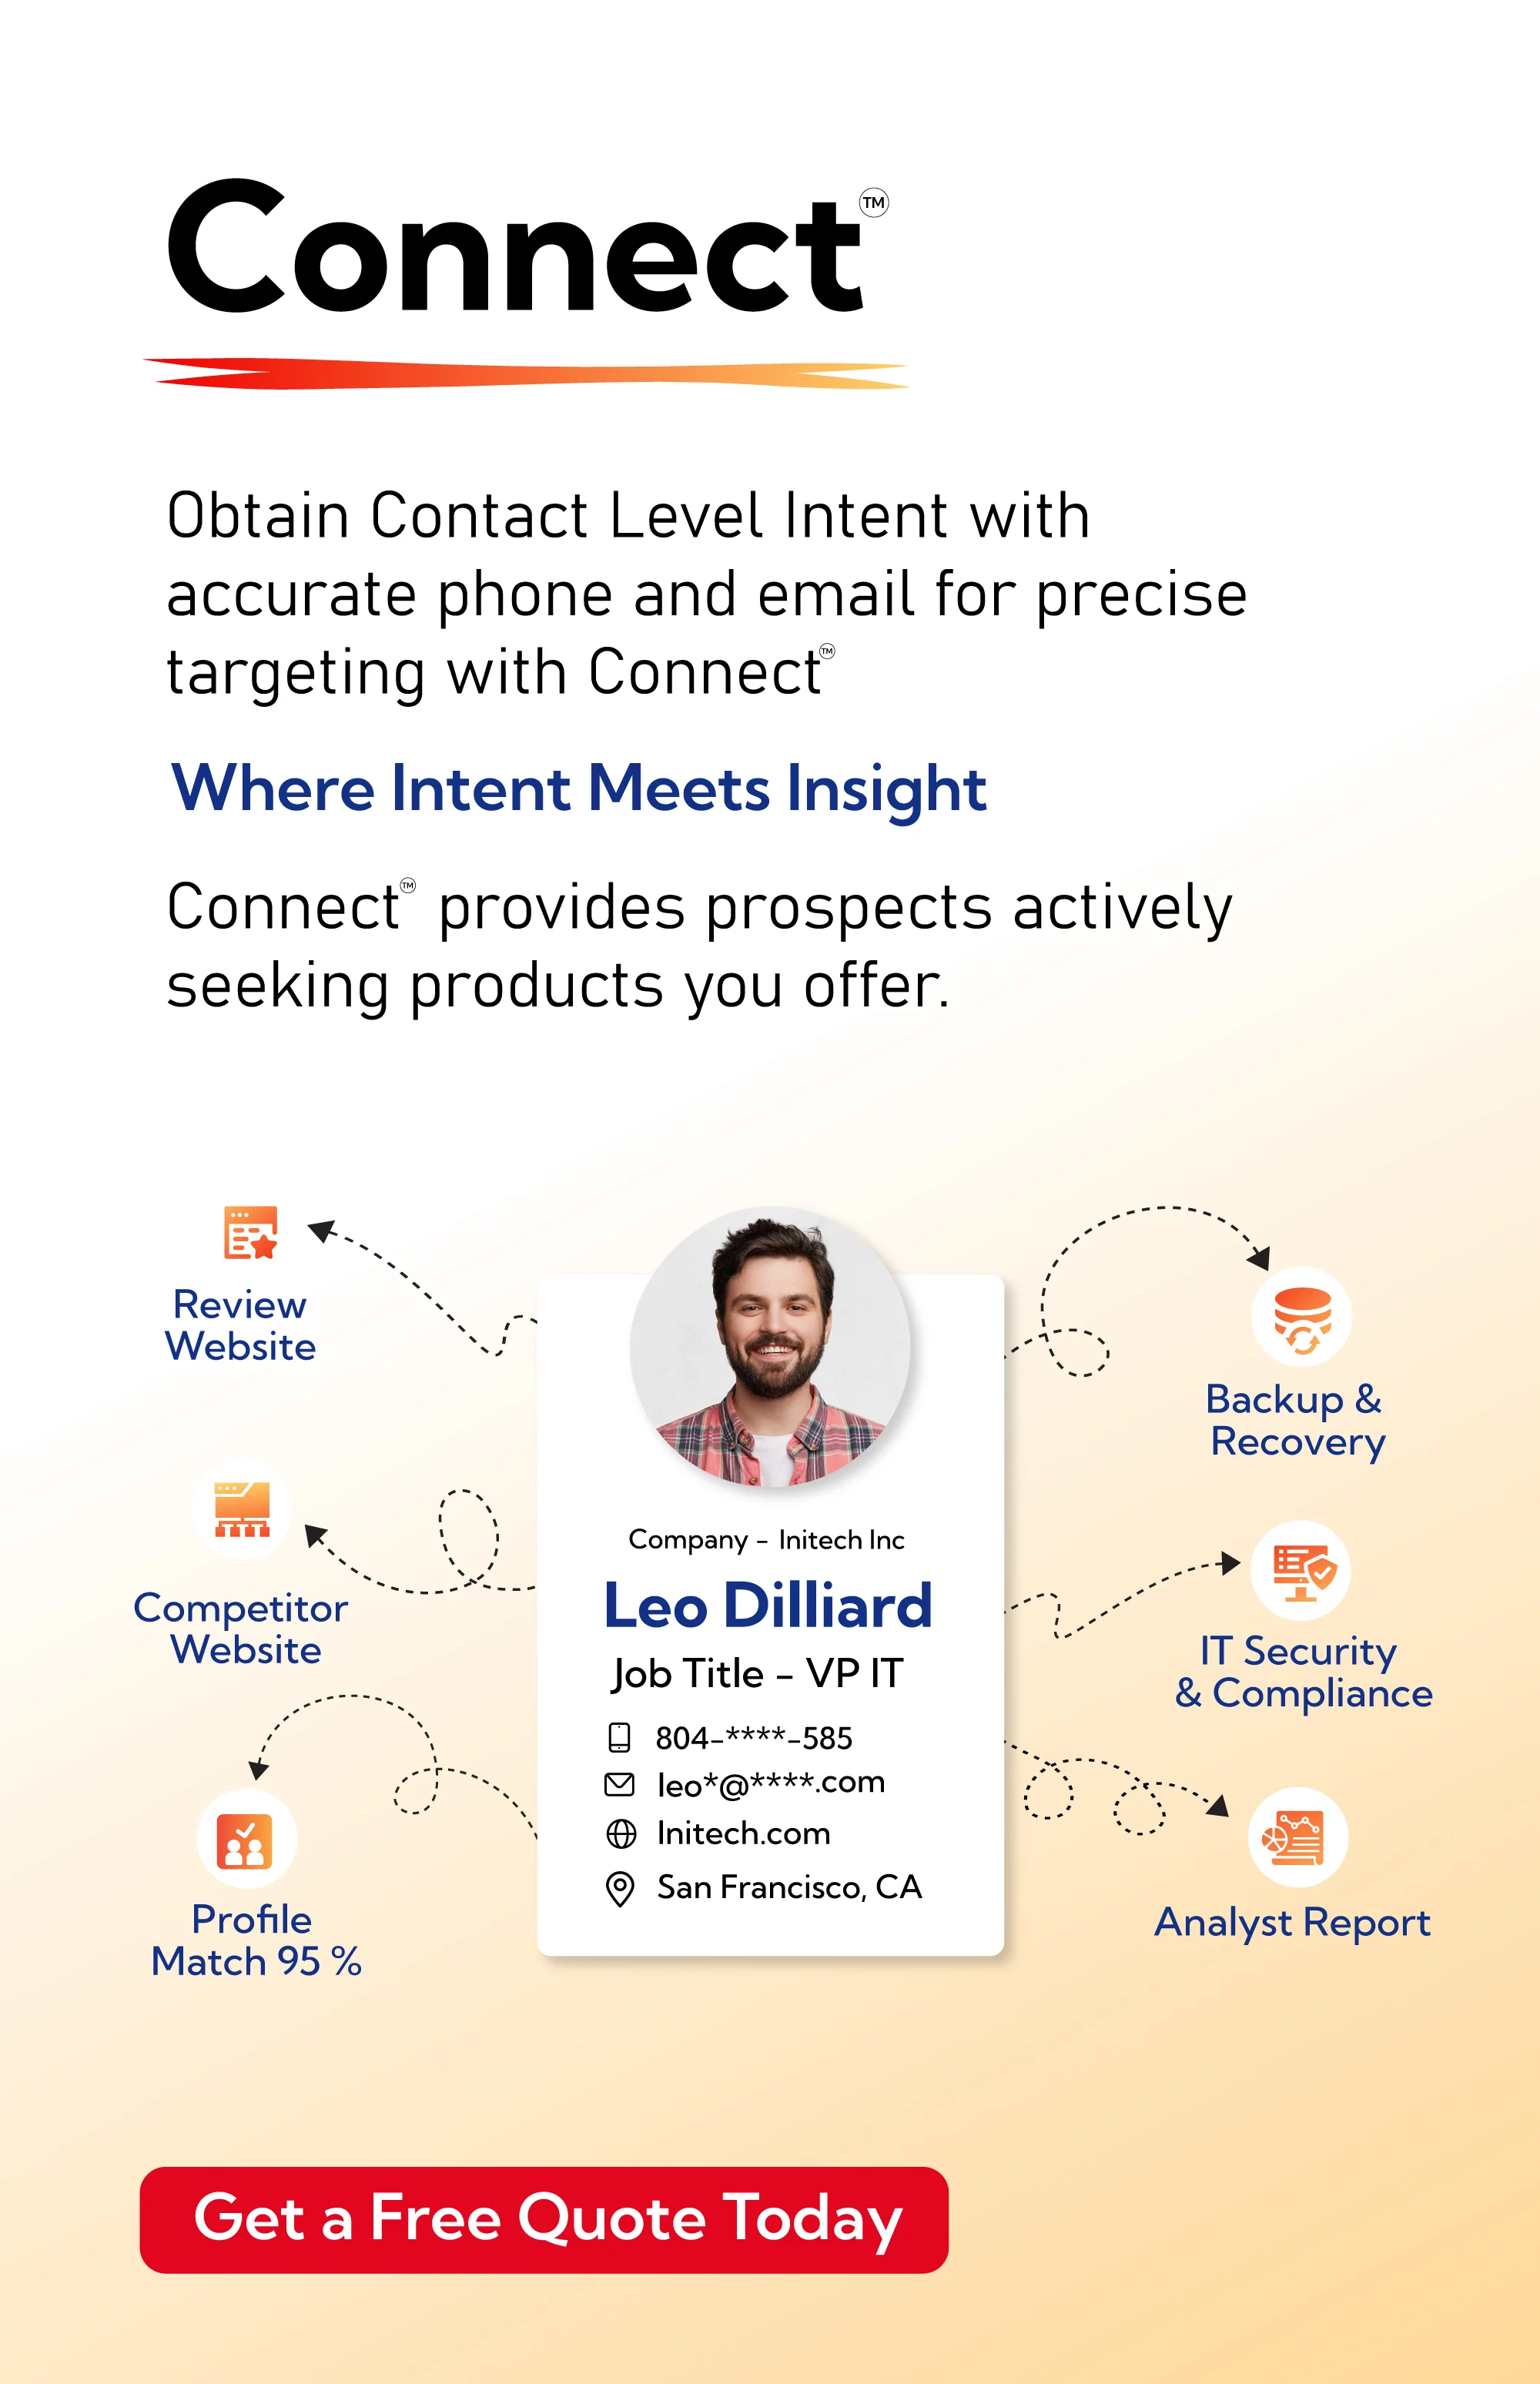 B2B Lead Generation with Connect